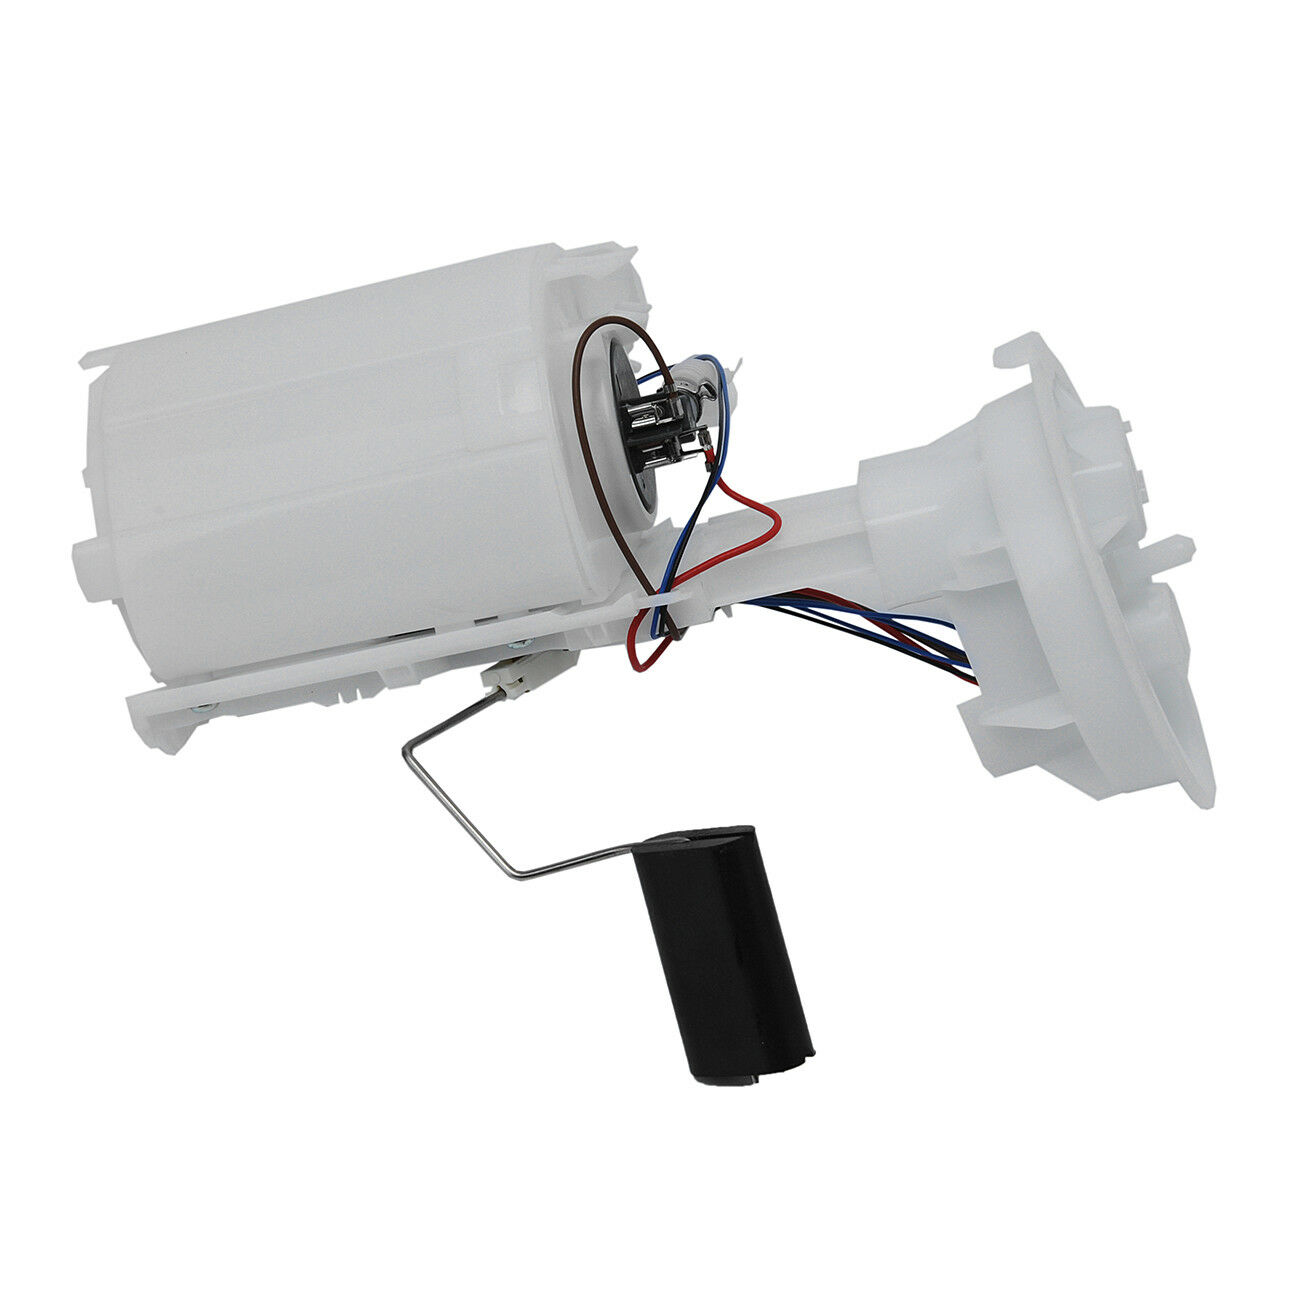 Fuel Pump Module Assembly For Mini Cooper R50 R53 01-06 16146756184 German Made